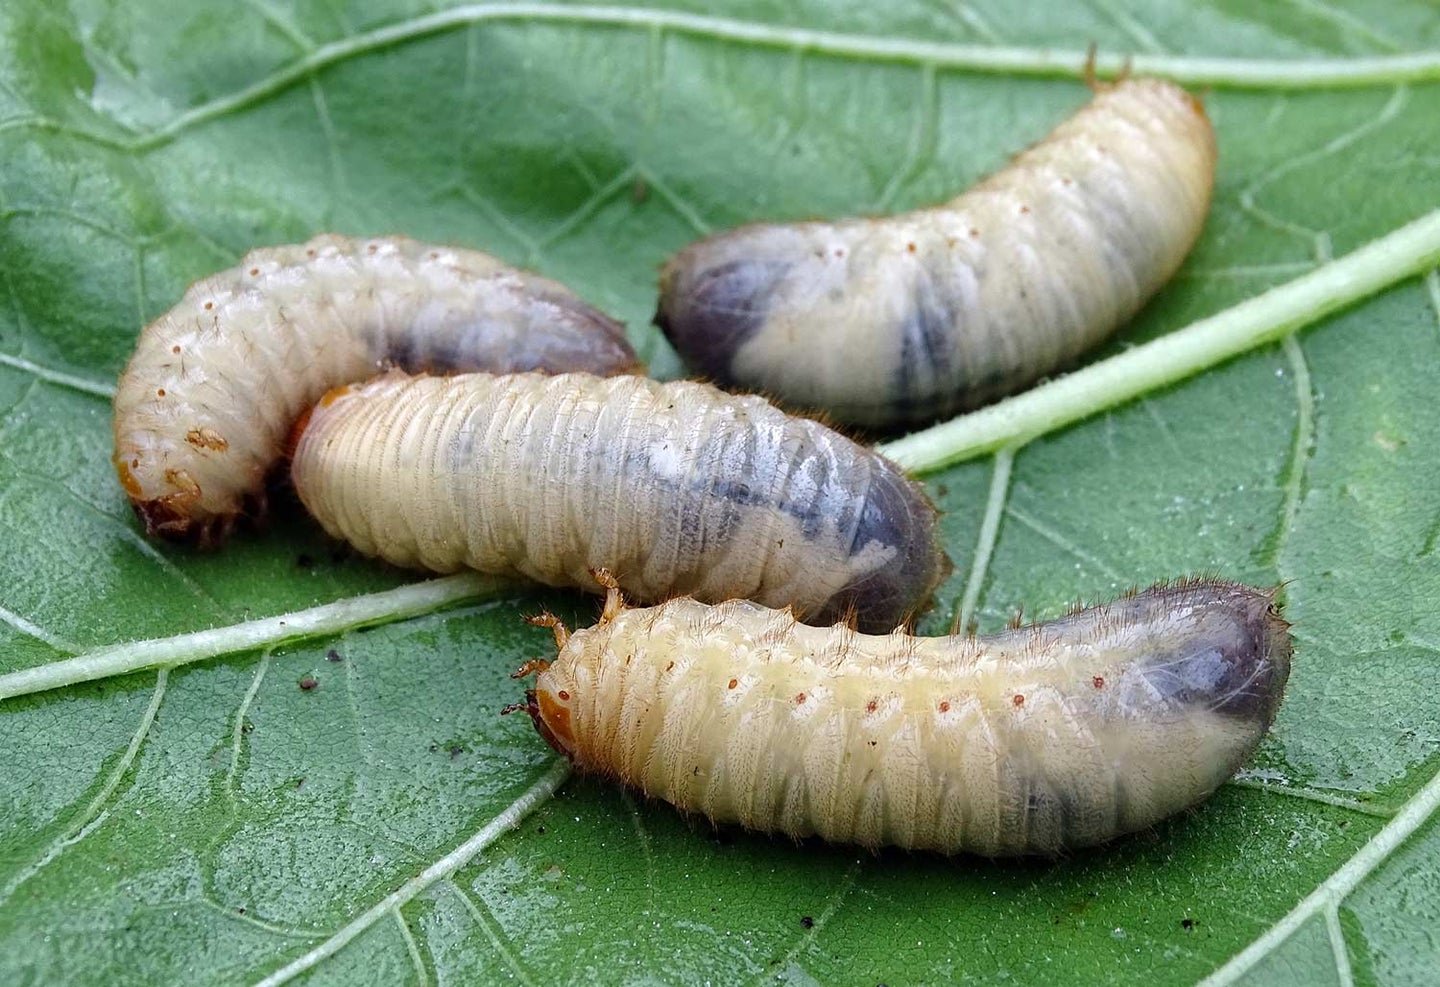 9 Bugs to Eat in a Survival Situation (And 4 You Want to Avoid)